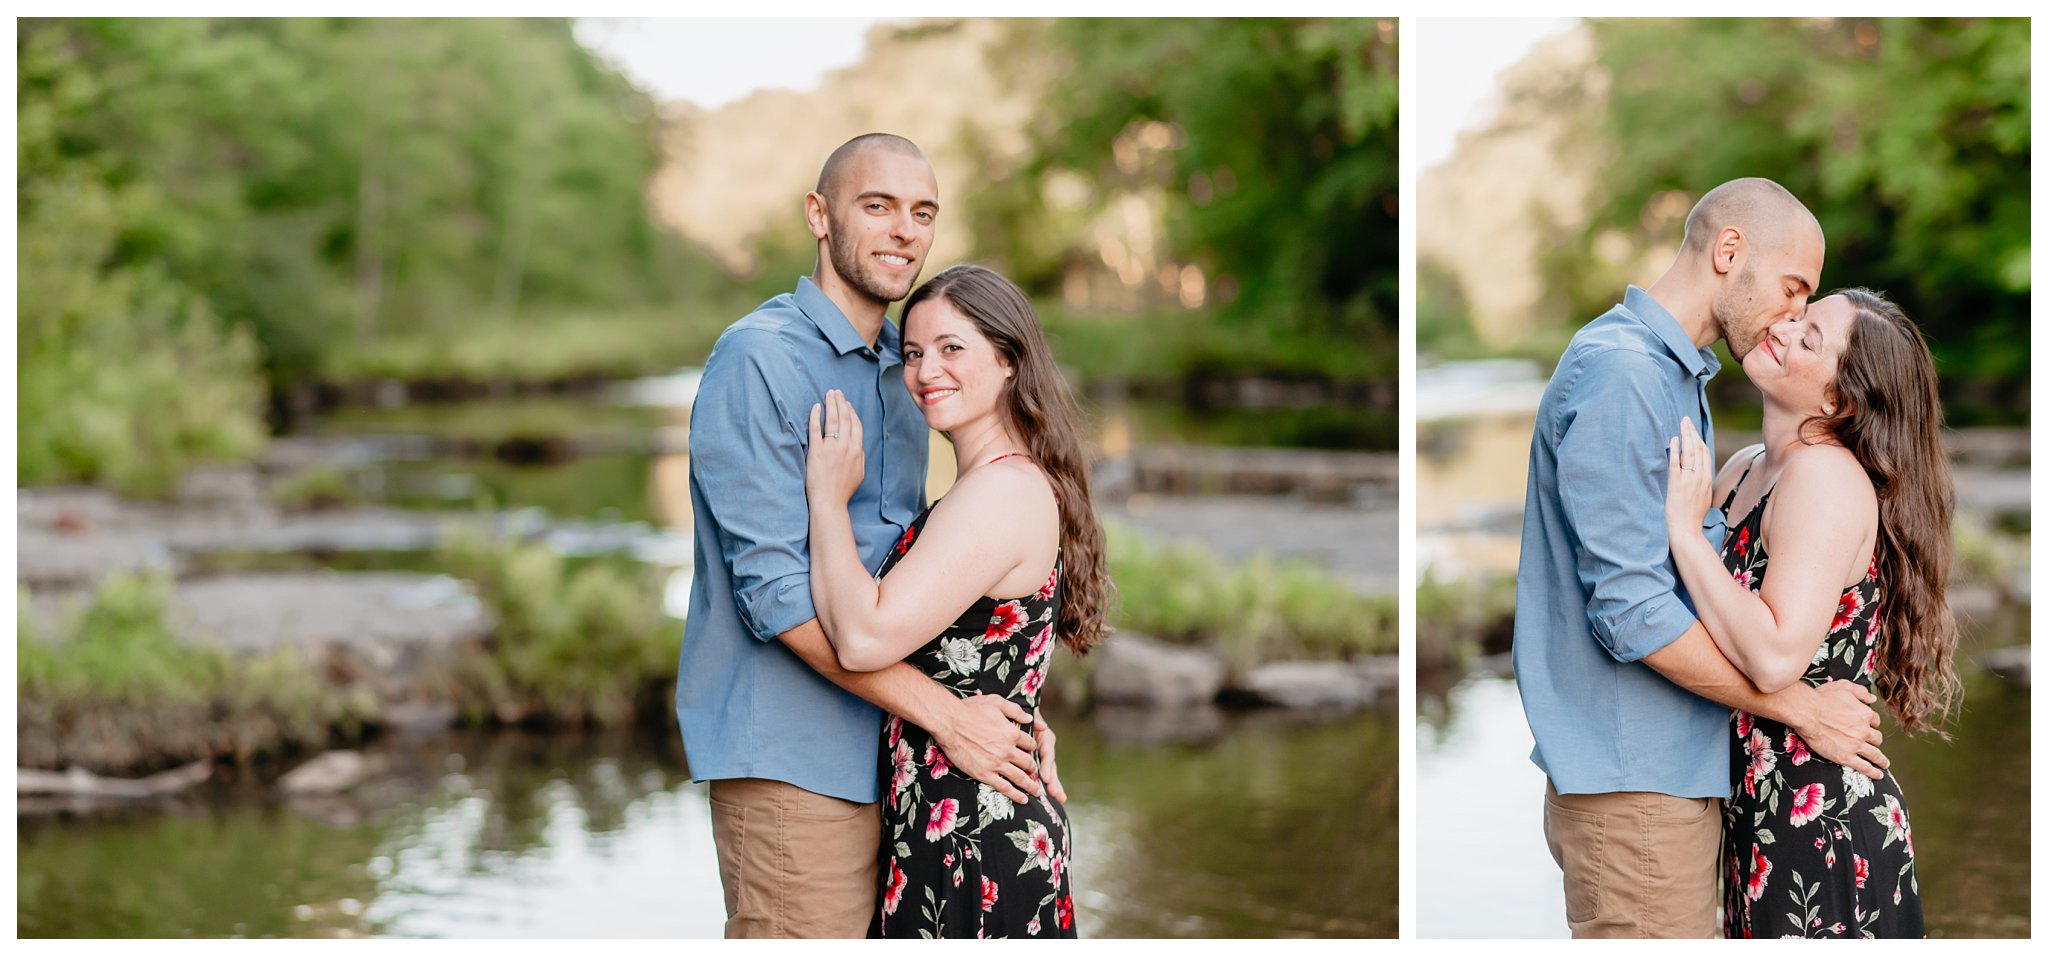 Salmon River Falls Engagement Session Joanna Young Photography_0016.jpg